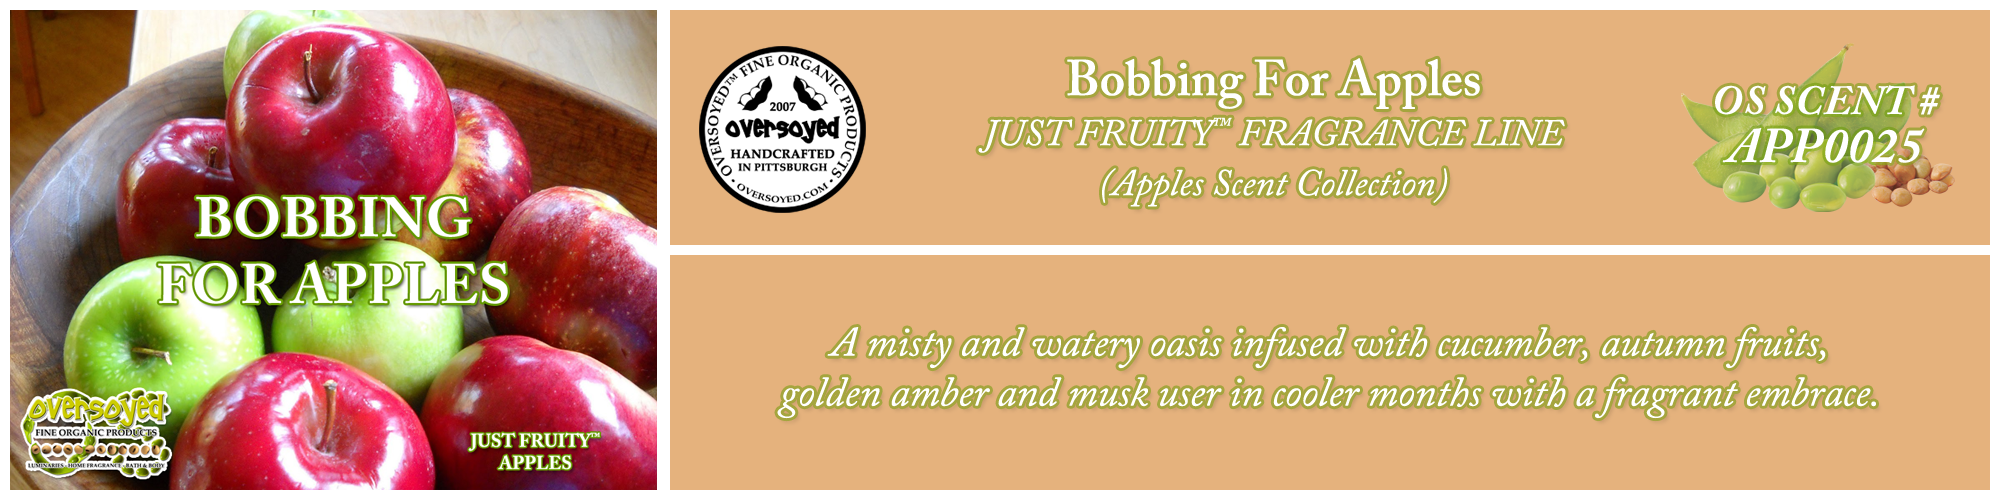 Bobbing For Apples Handcrafted Products Collection